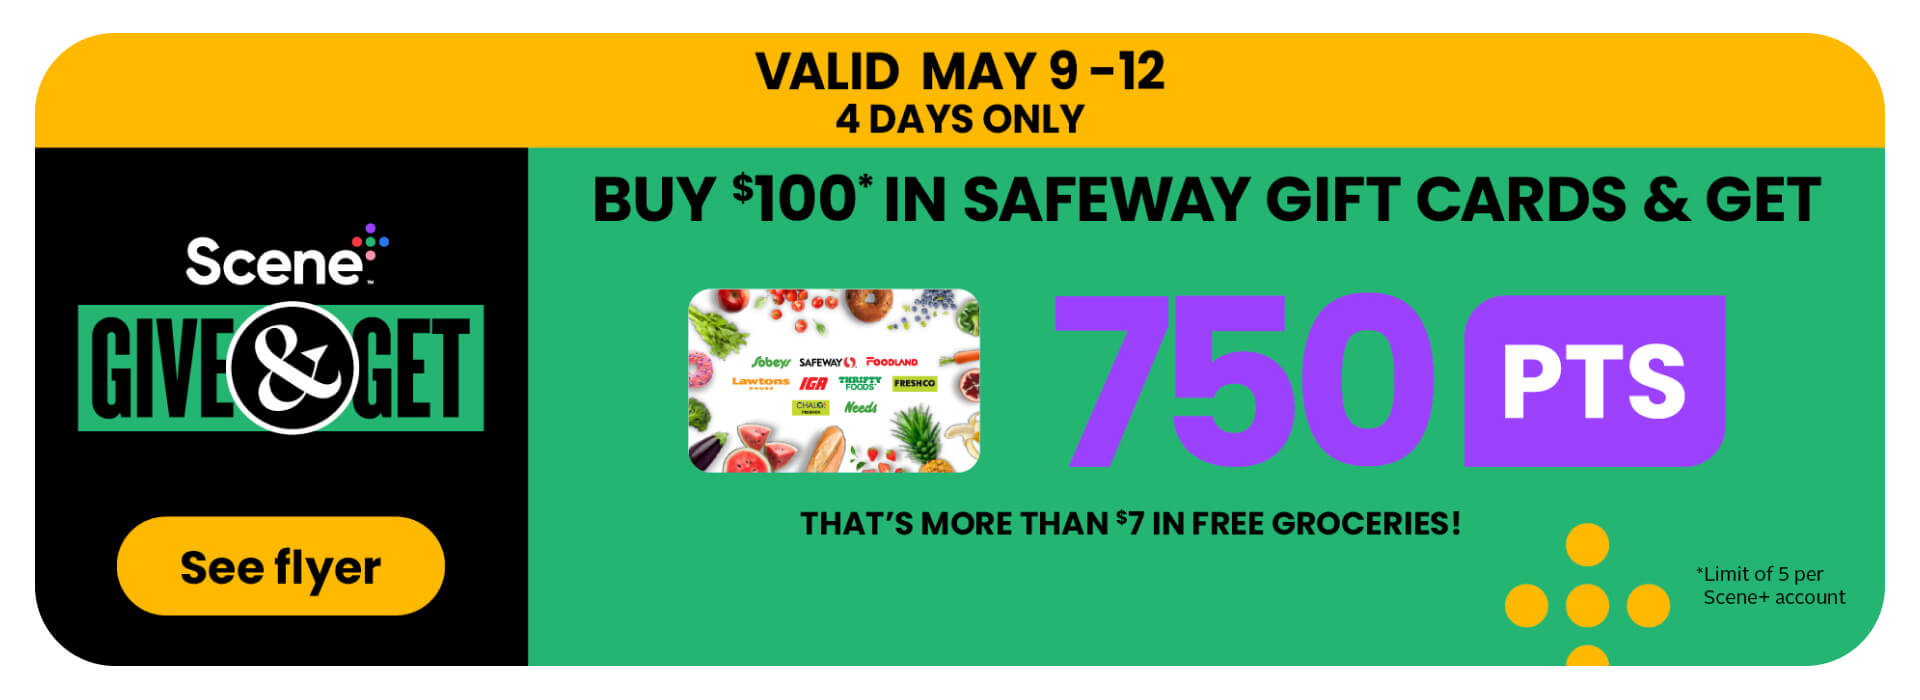 Spend & Get! 4 Days Only! Spend $100 get 750 PTS. See flyer for more details